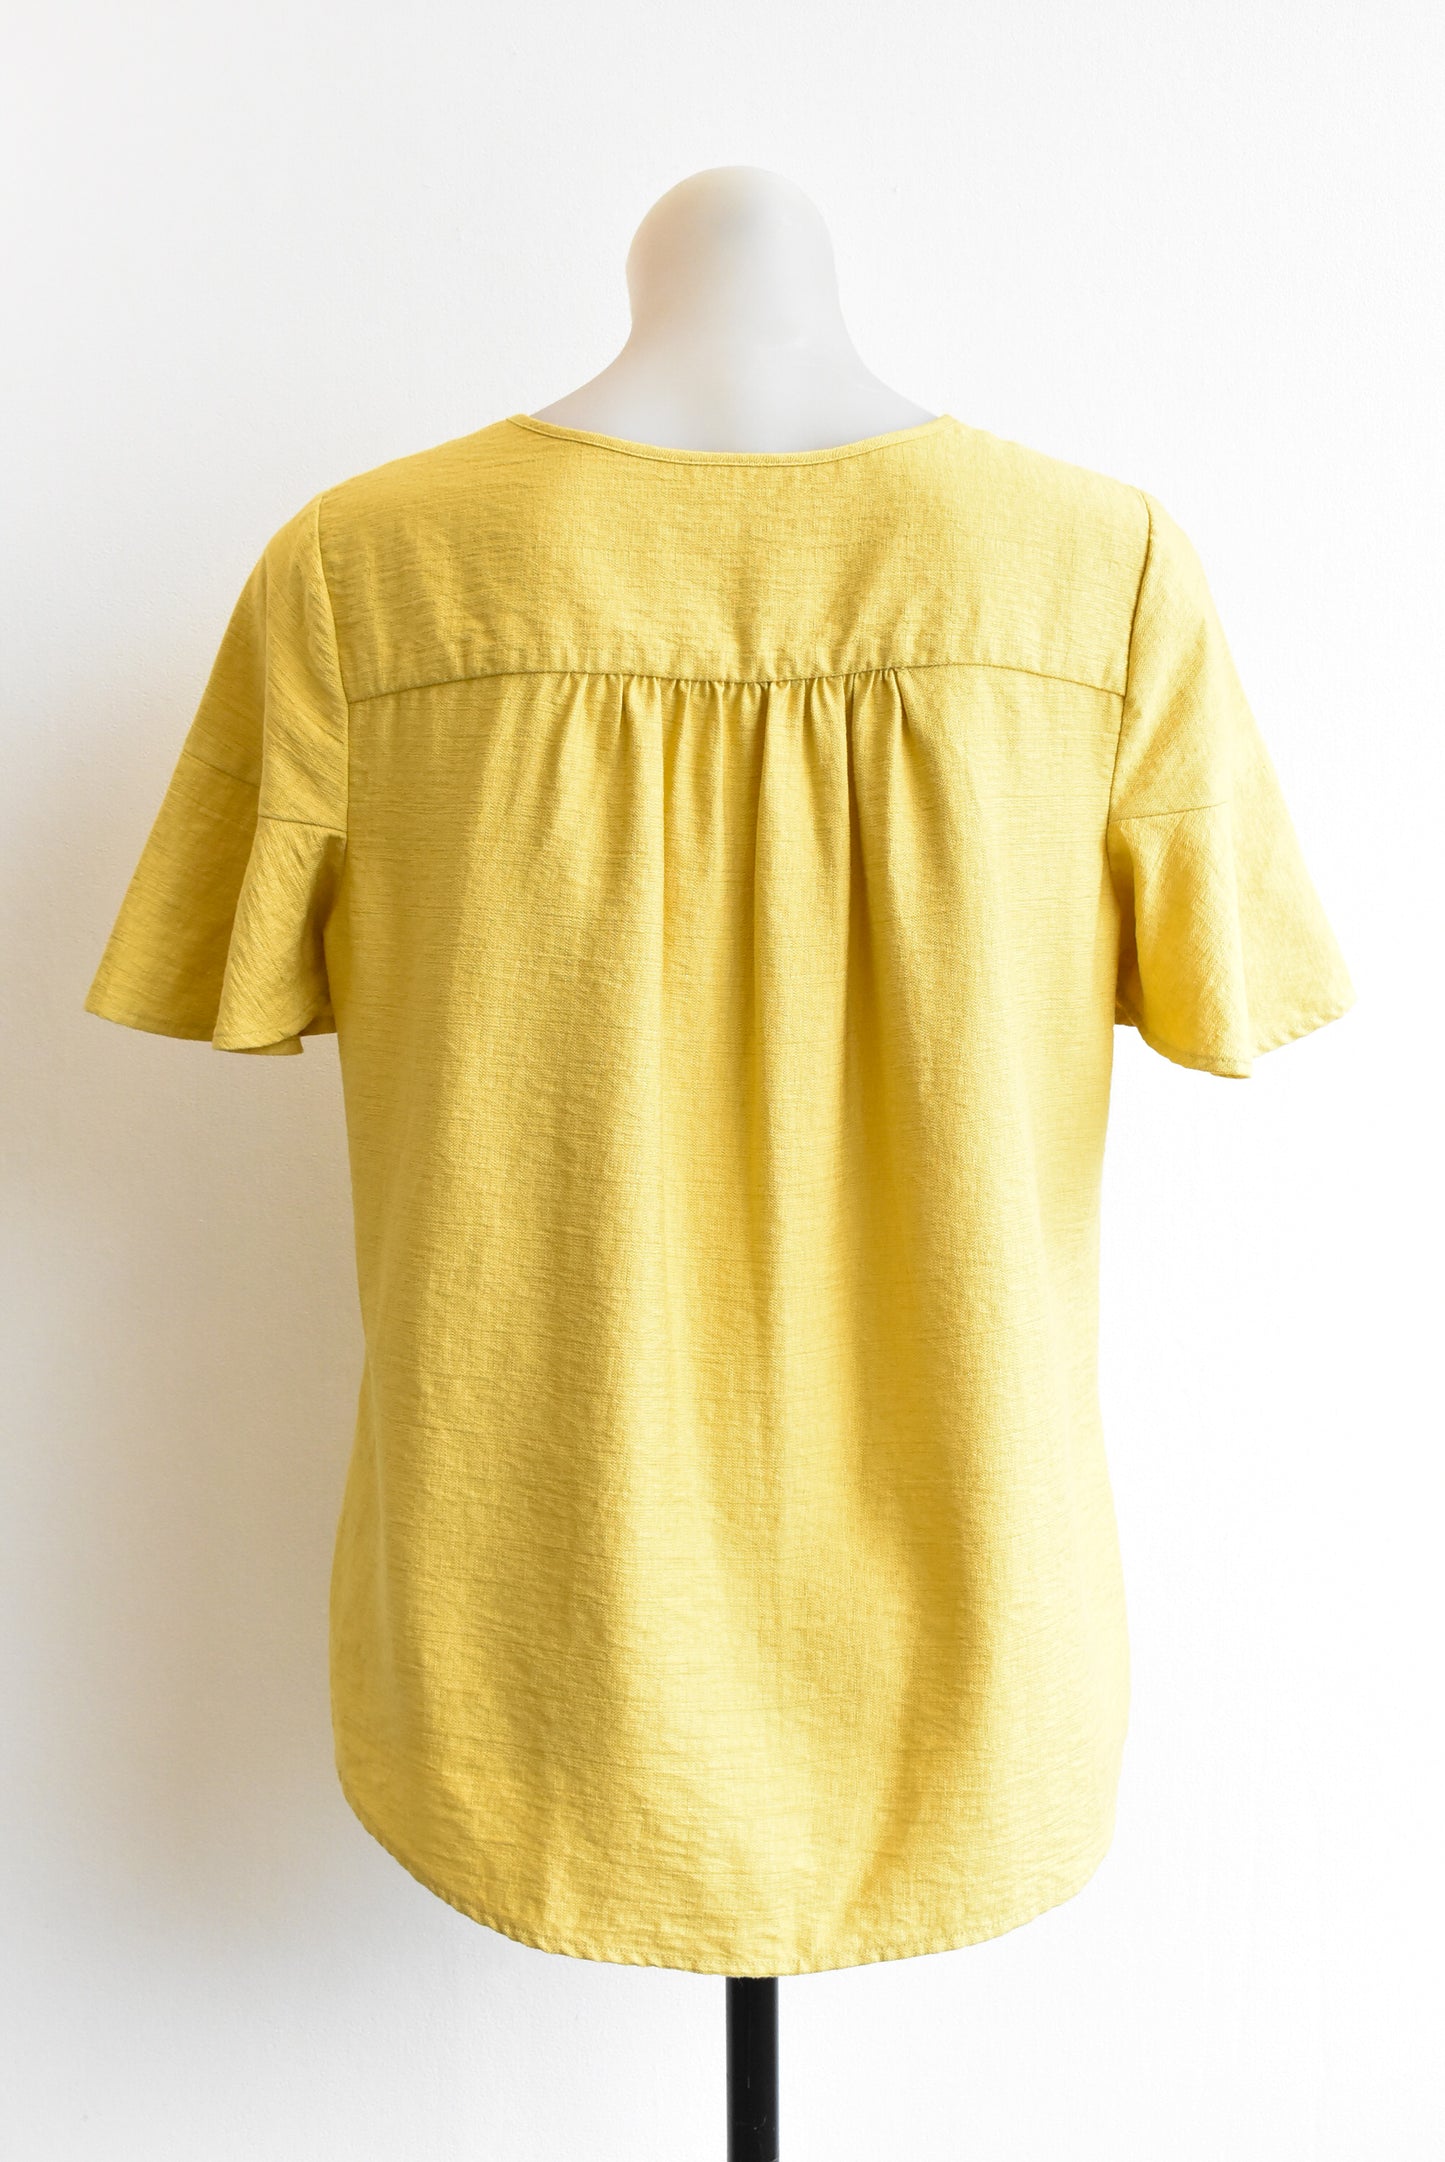 Seed yellow flared sleeve top, size S